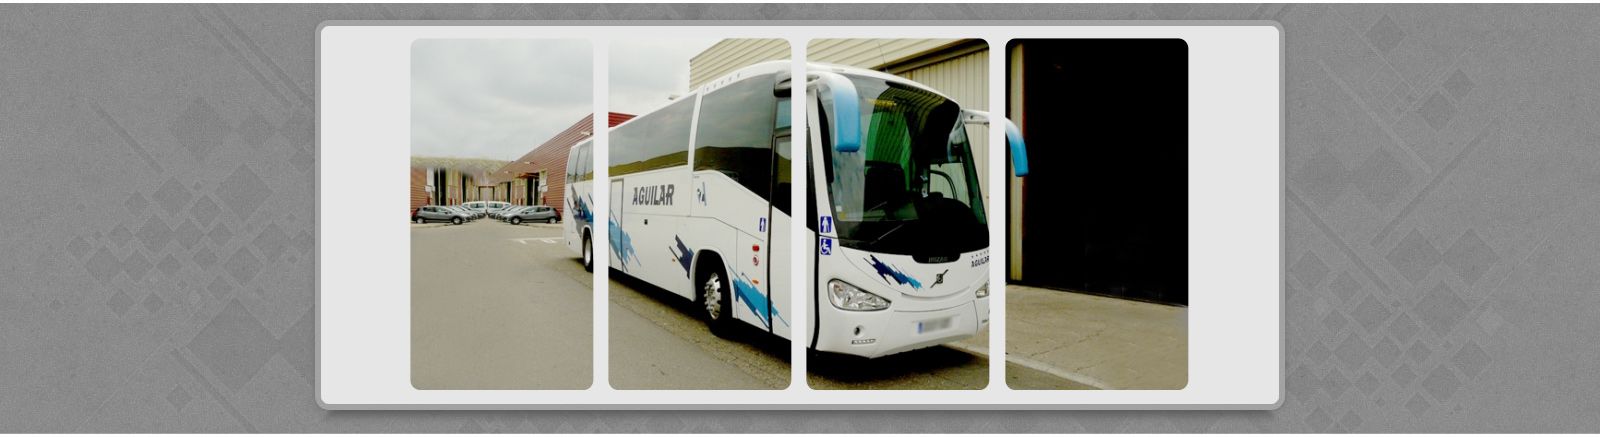 Autobuses Aguilar banner1